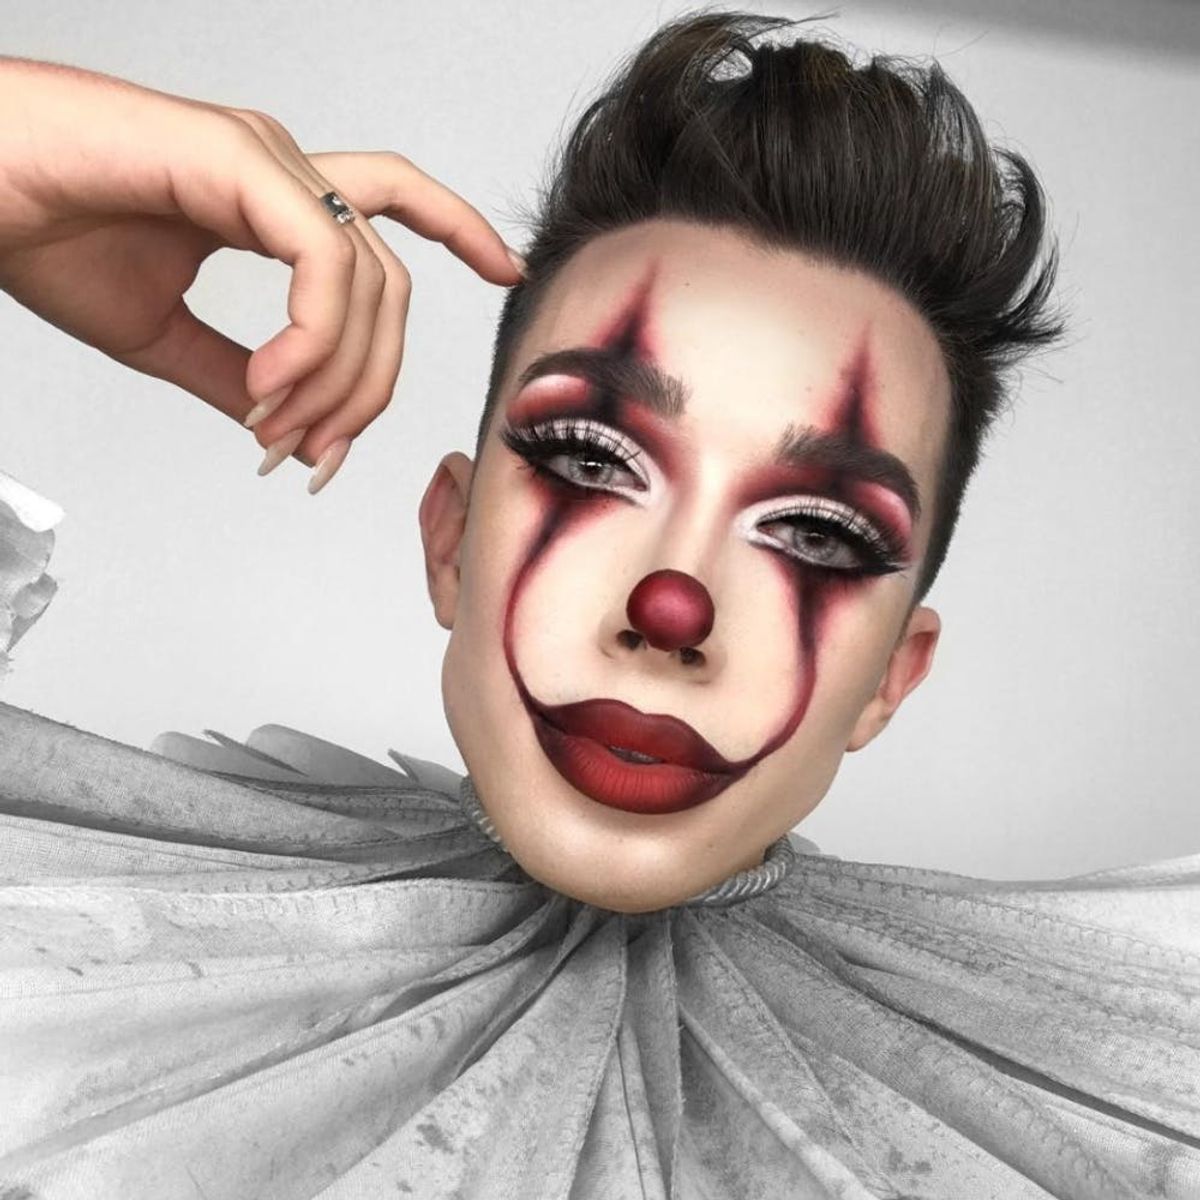 James Charles’ Pennywise Tutorial Sparked Insane Drama With “It” Cast